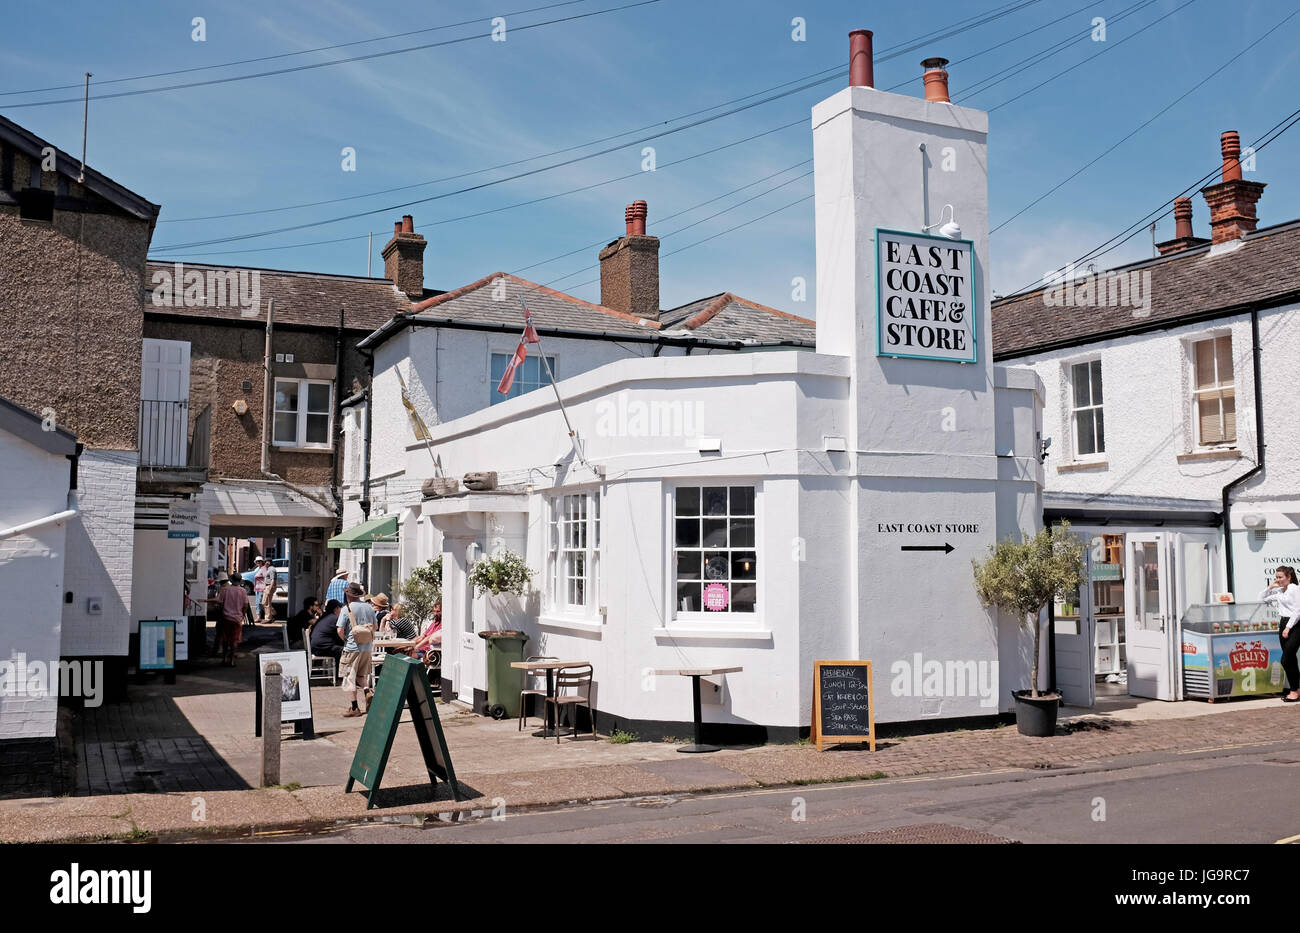 Aldeburgh Suffolk UK June 2017 - The East Coast Cafe & Store Stock Photo